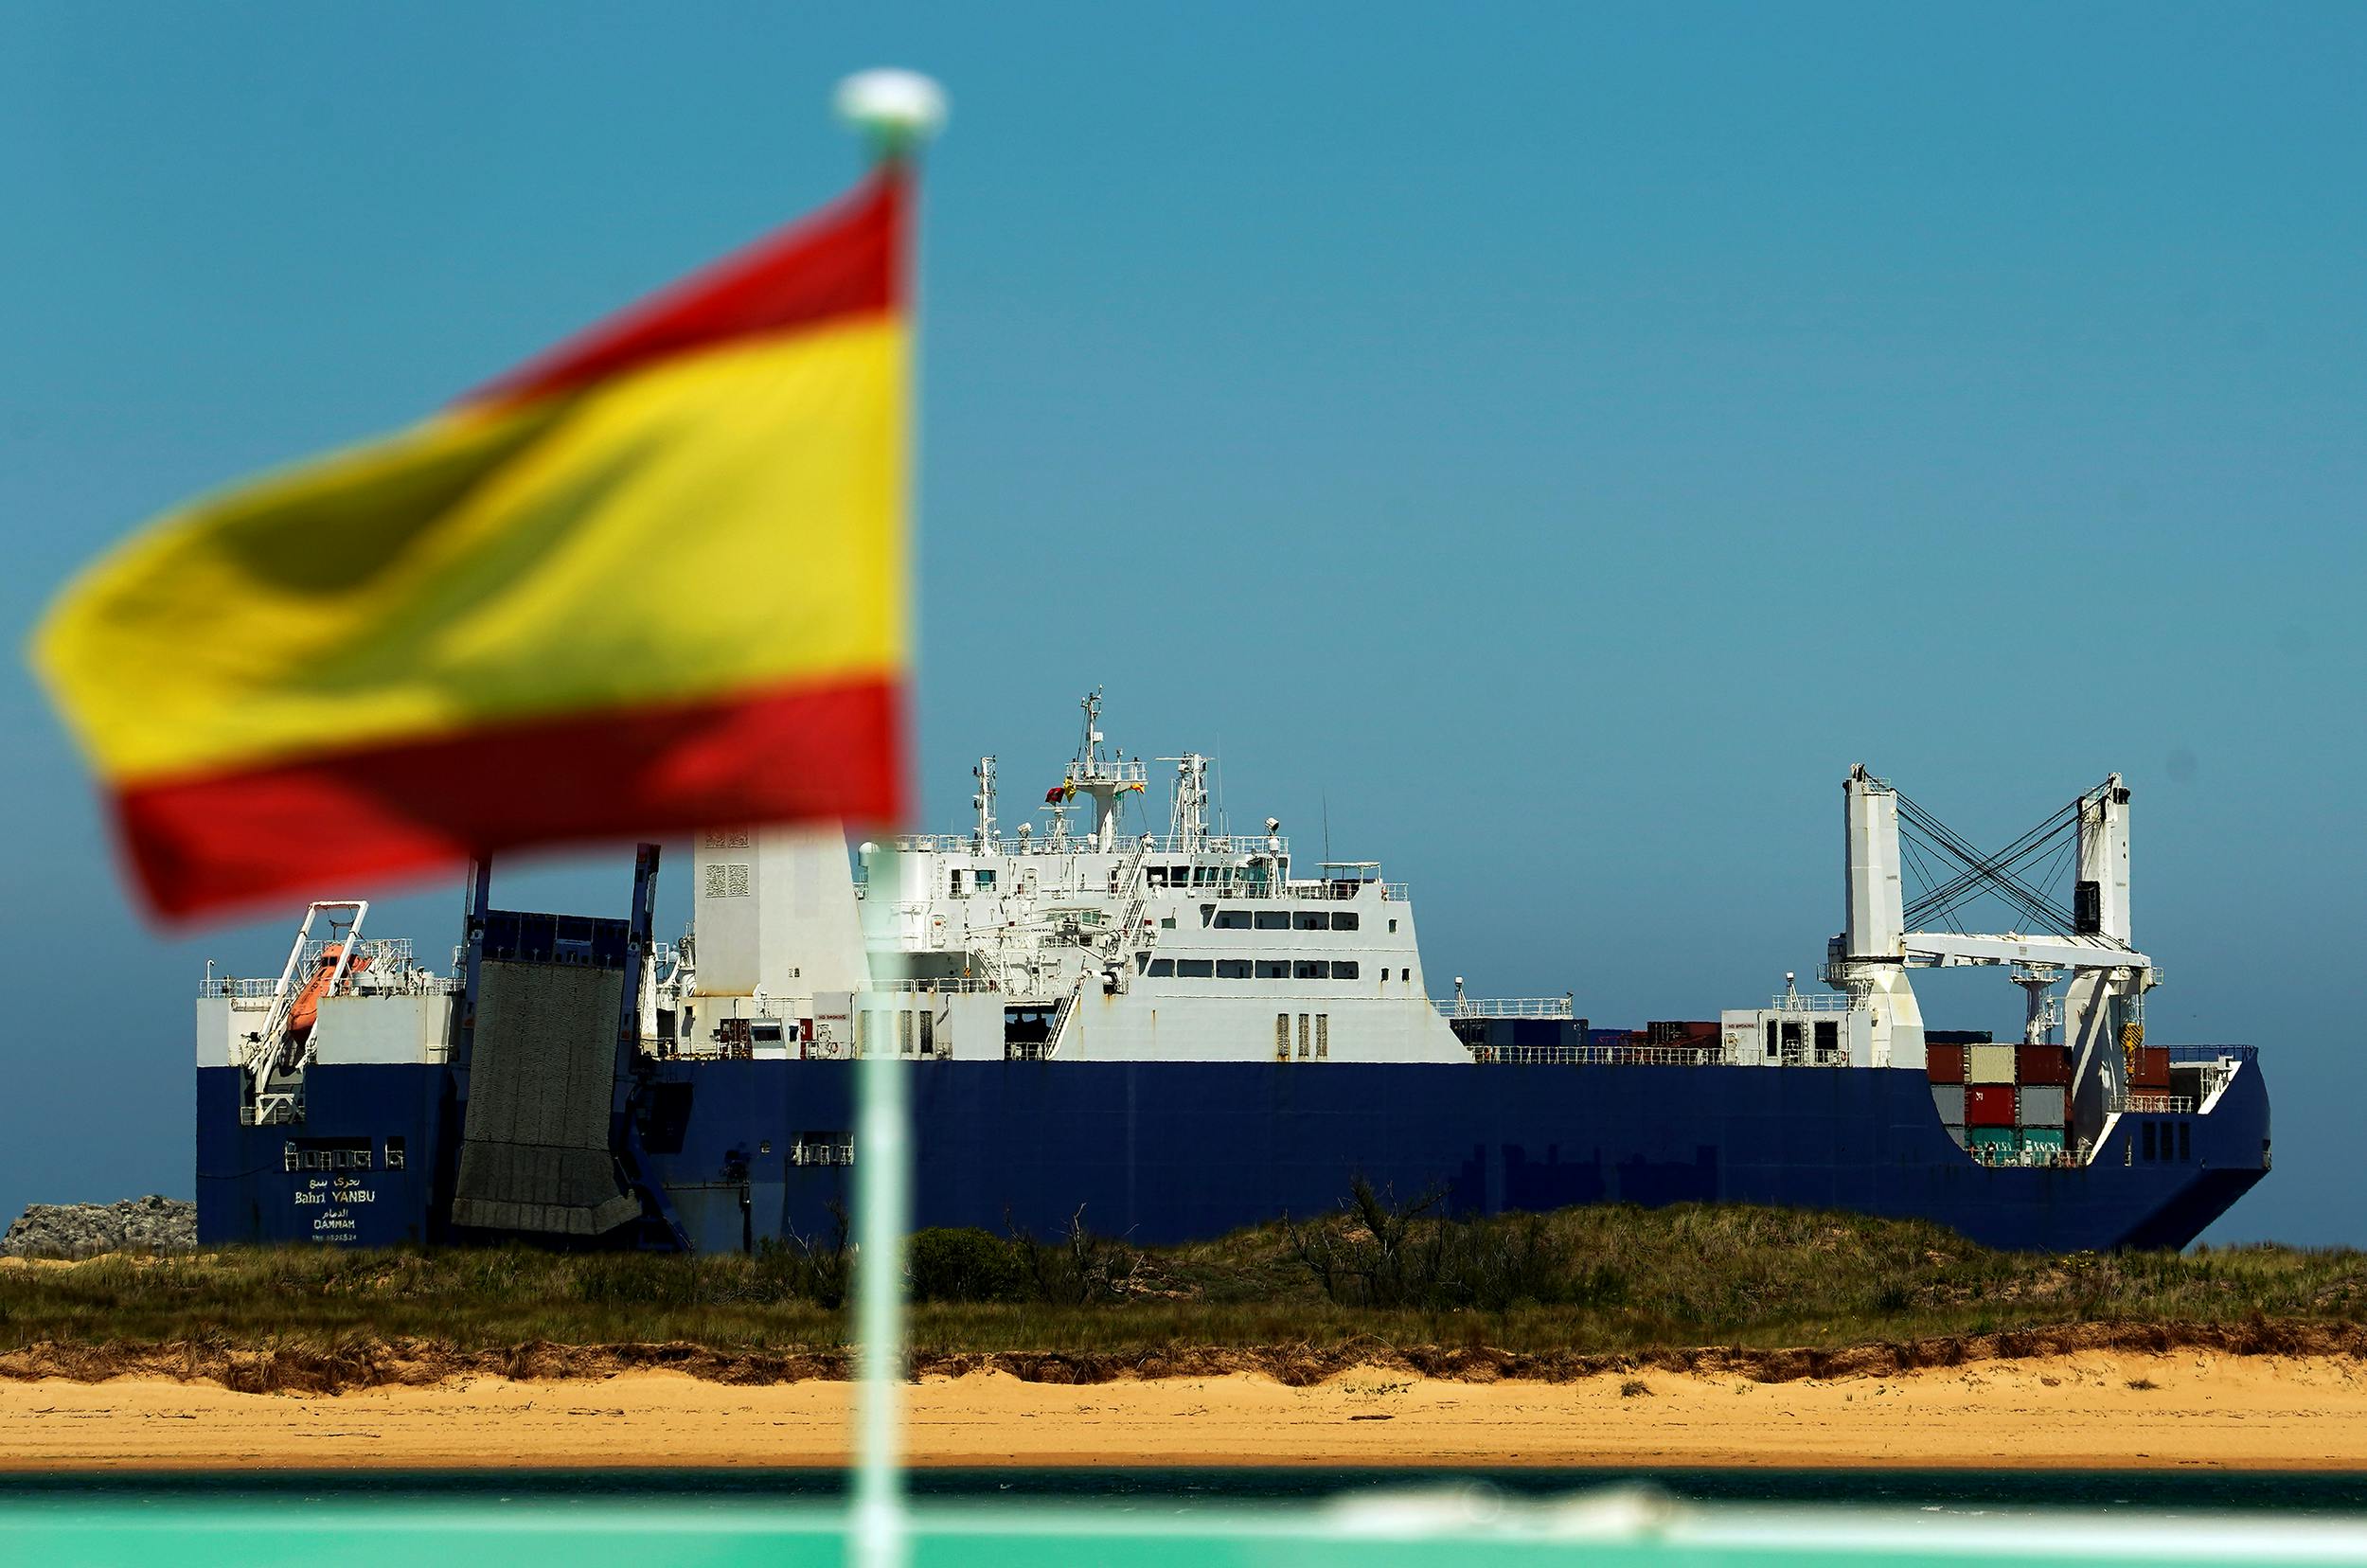 Saudi cargo ship Bahri-Yanbu passes a Spanish flag while departing the port of Santander, Spain May 13, 2019, after a human rights group sought to block the loading of a weapons cargo in Le Havre on humanitarian grounds, arguing the arms could be used against civilians in Yemen. 